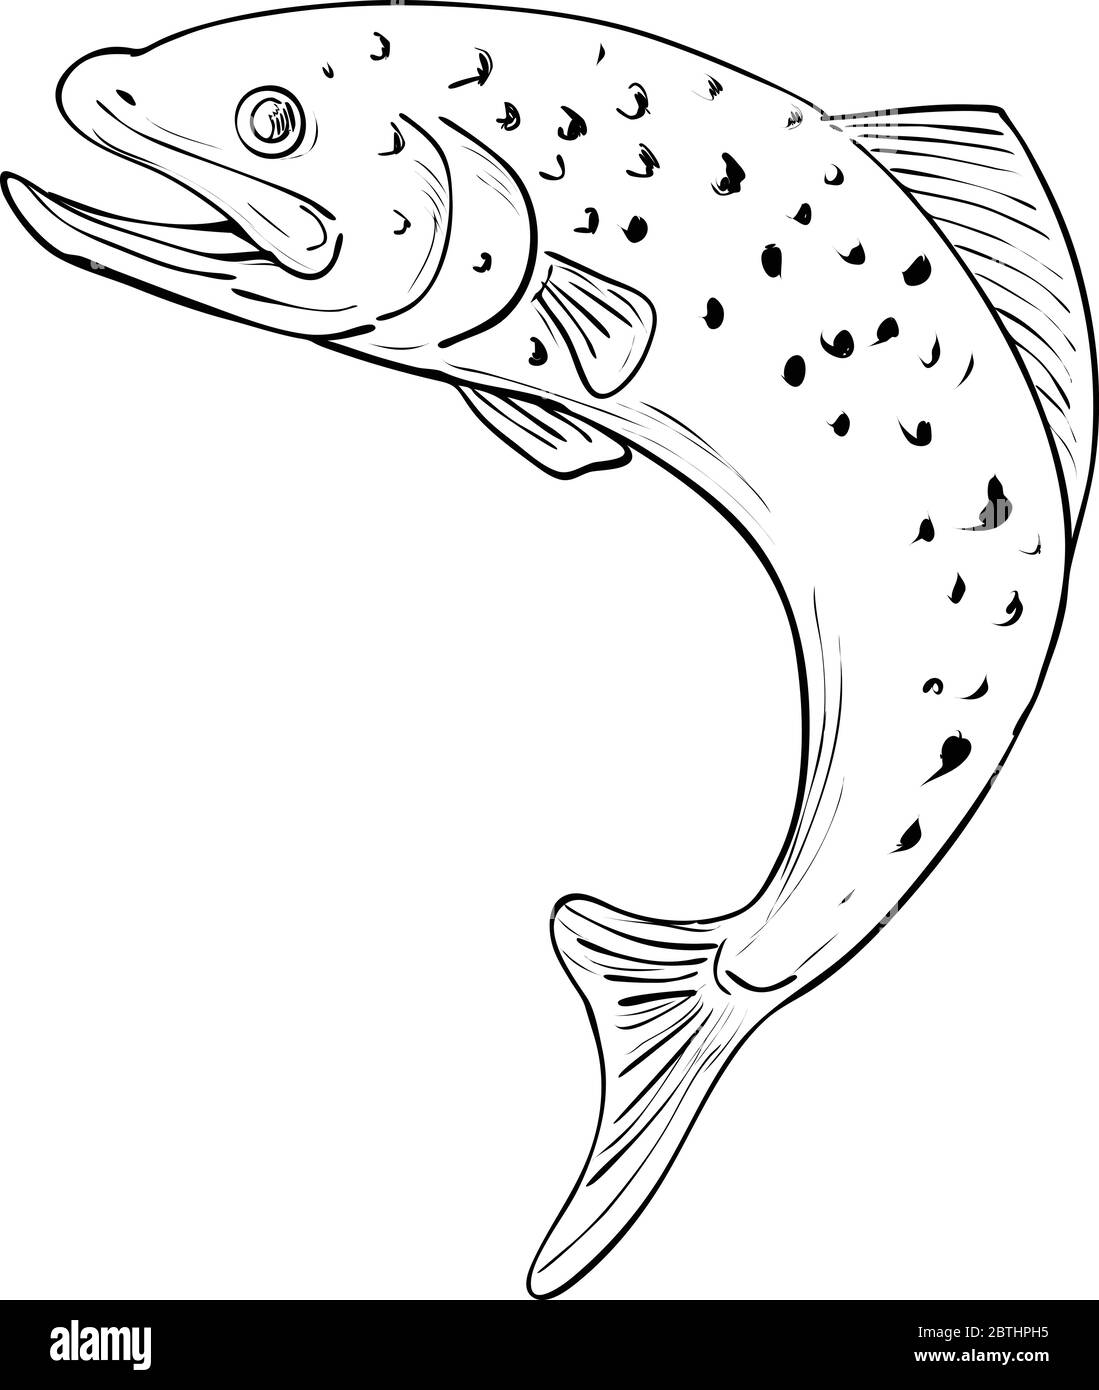 Drawing sketch style illustration of a spotted brown Trout jumping on isolated background done in Black and White. Stock Vector